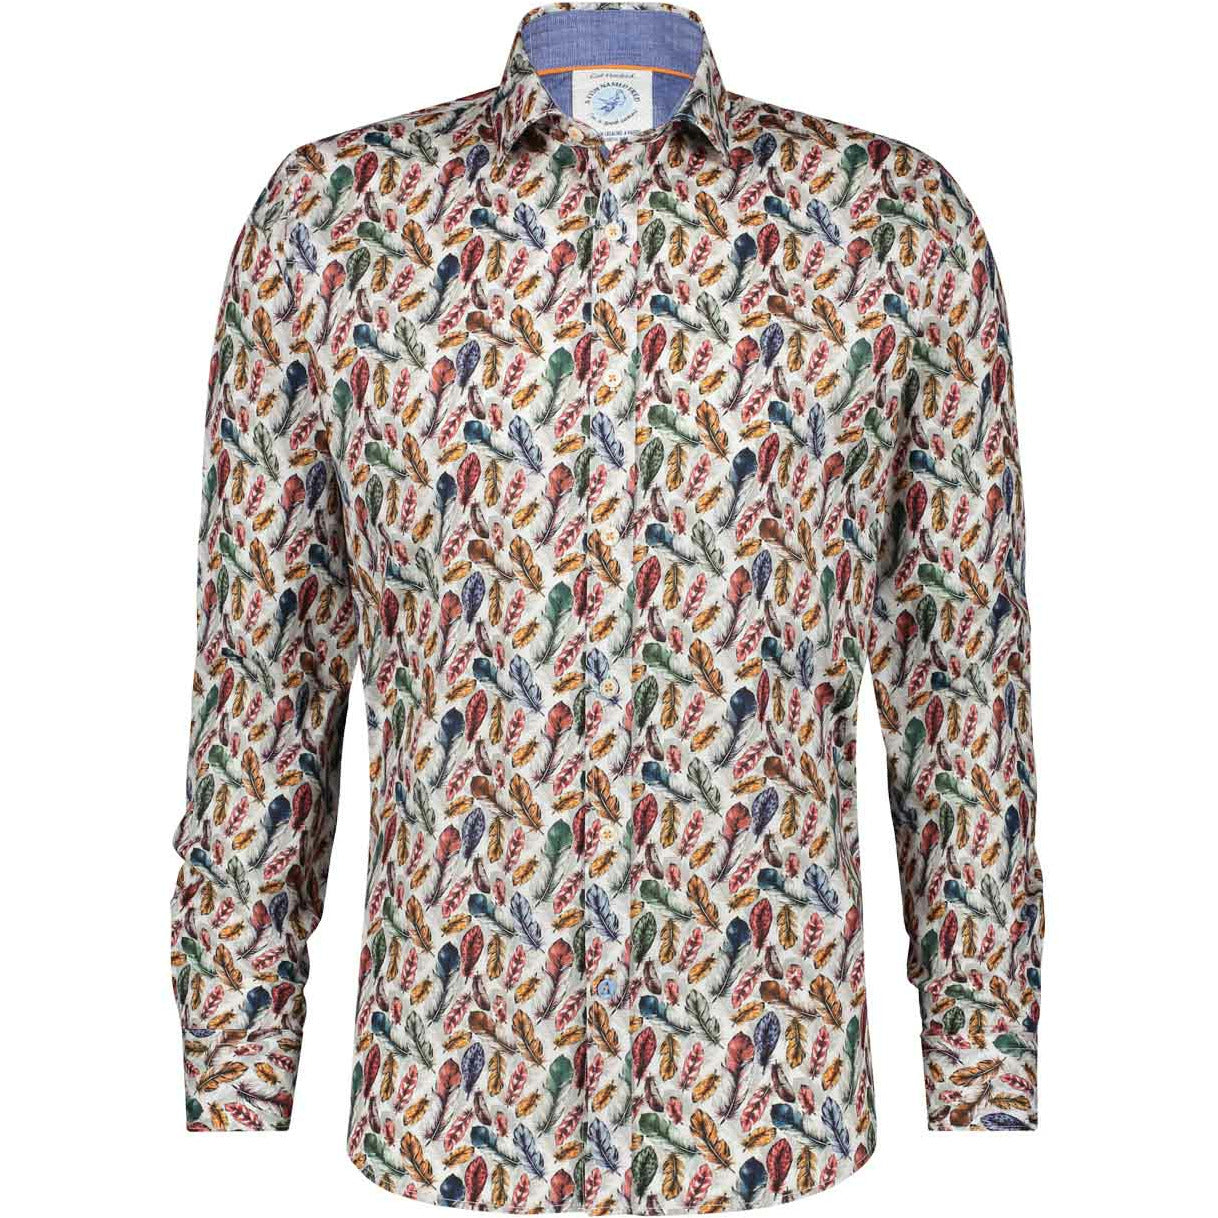 AFNF Shirt - Colourful Feathers